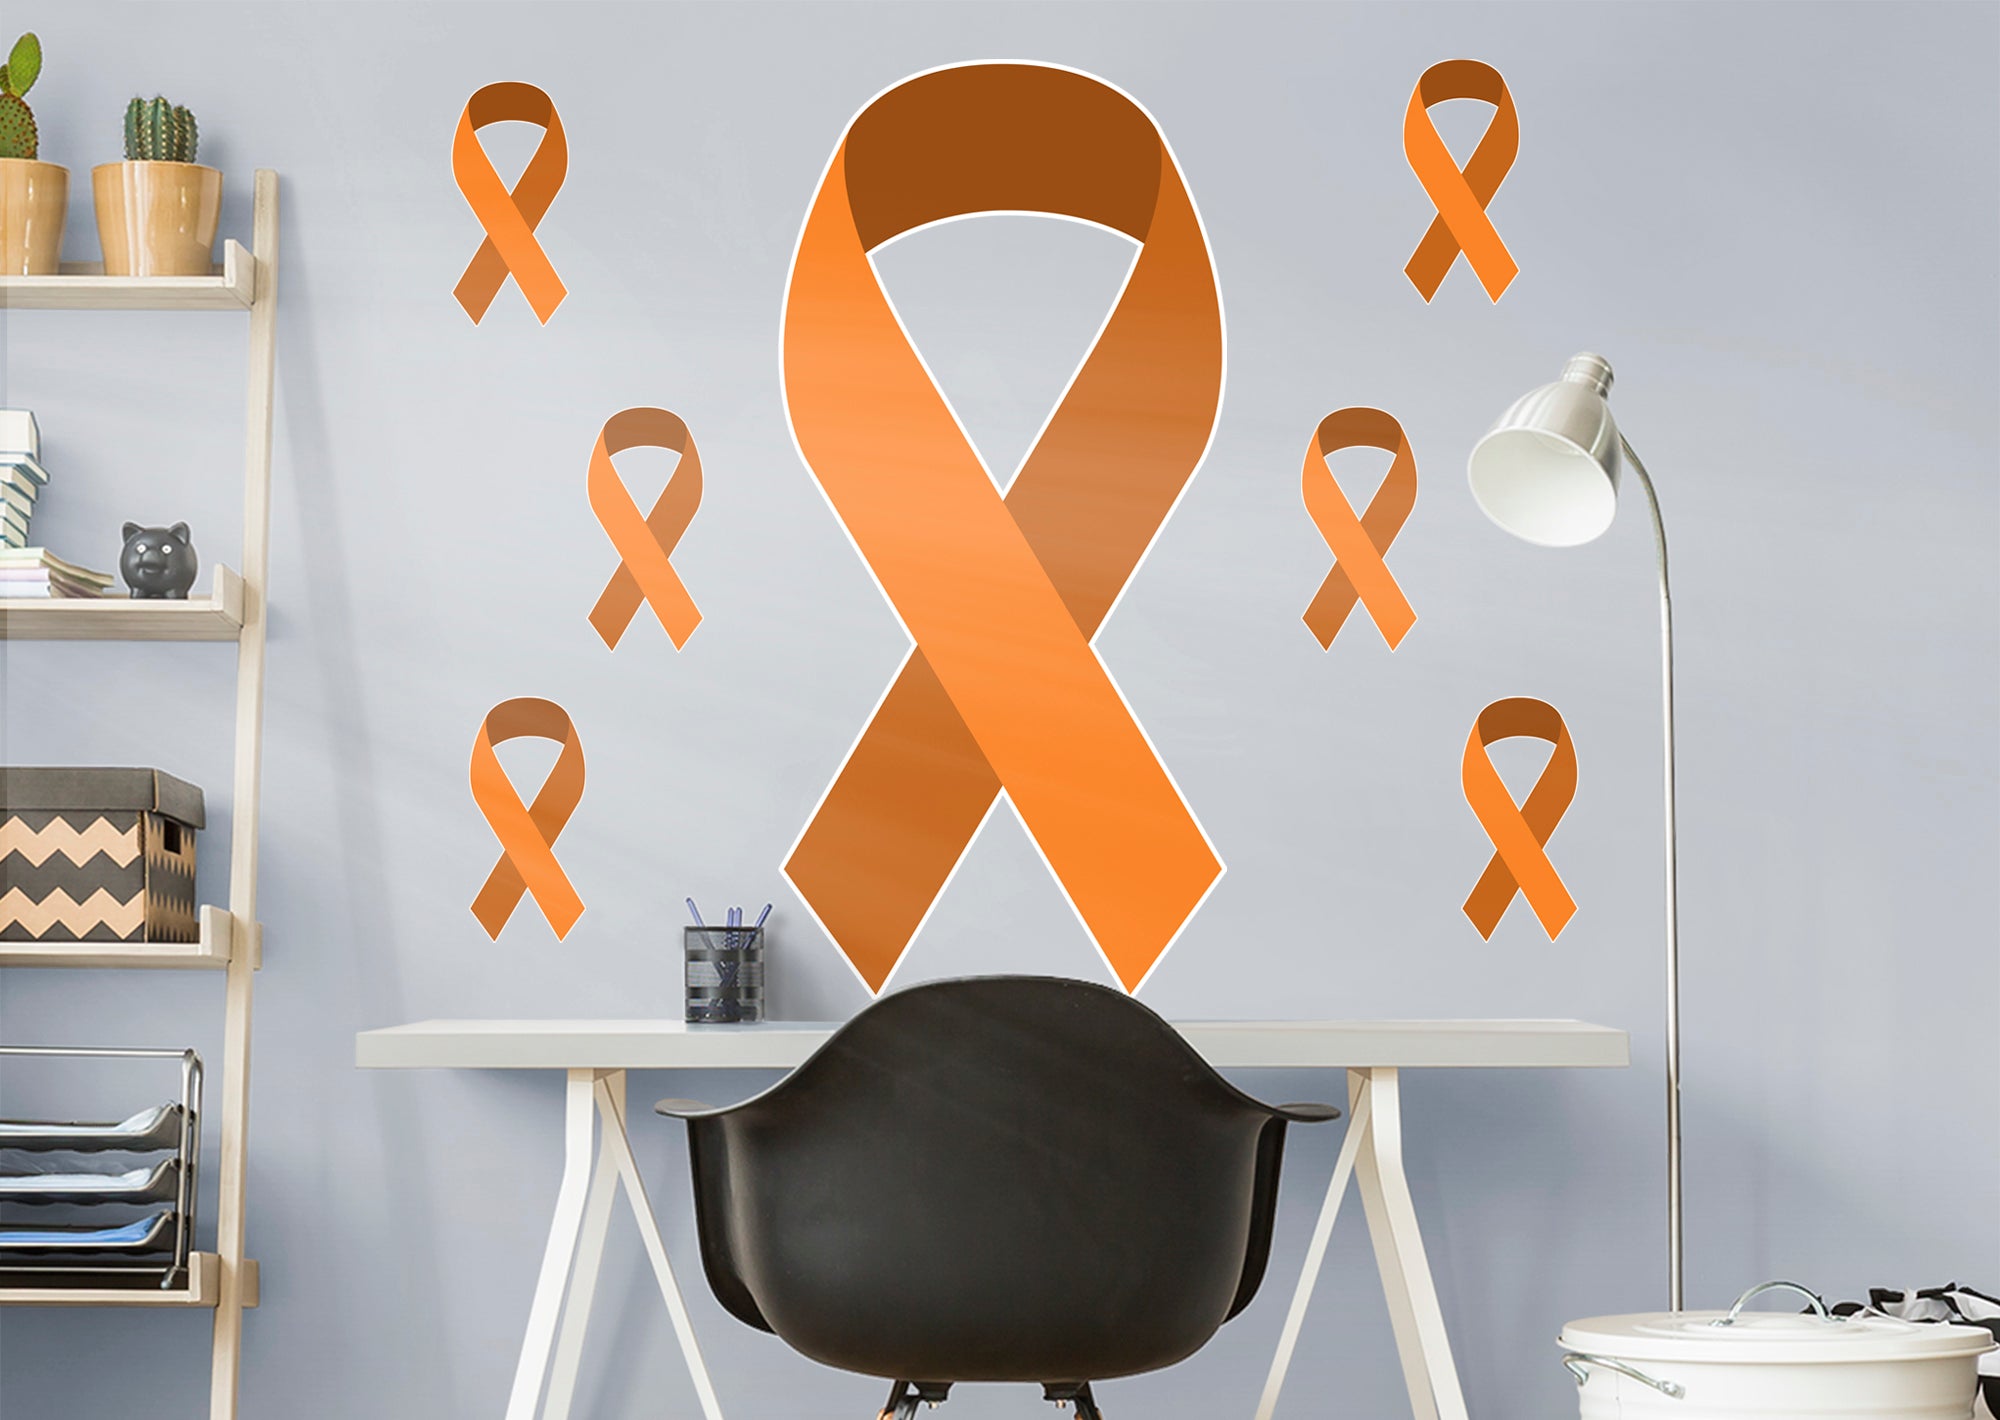 Colors of Cancer Ribbons: American Cancer Society Removable Wall Decal Giant Leukemia Cancer Ribbon + 6 Decals (24"W x 51"H) by